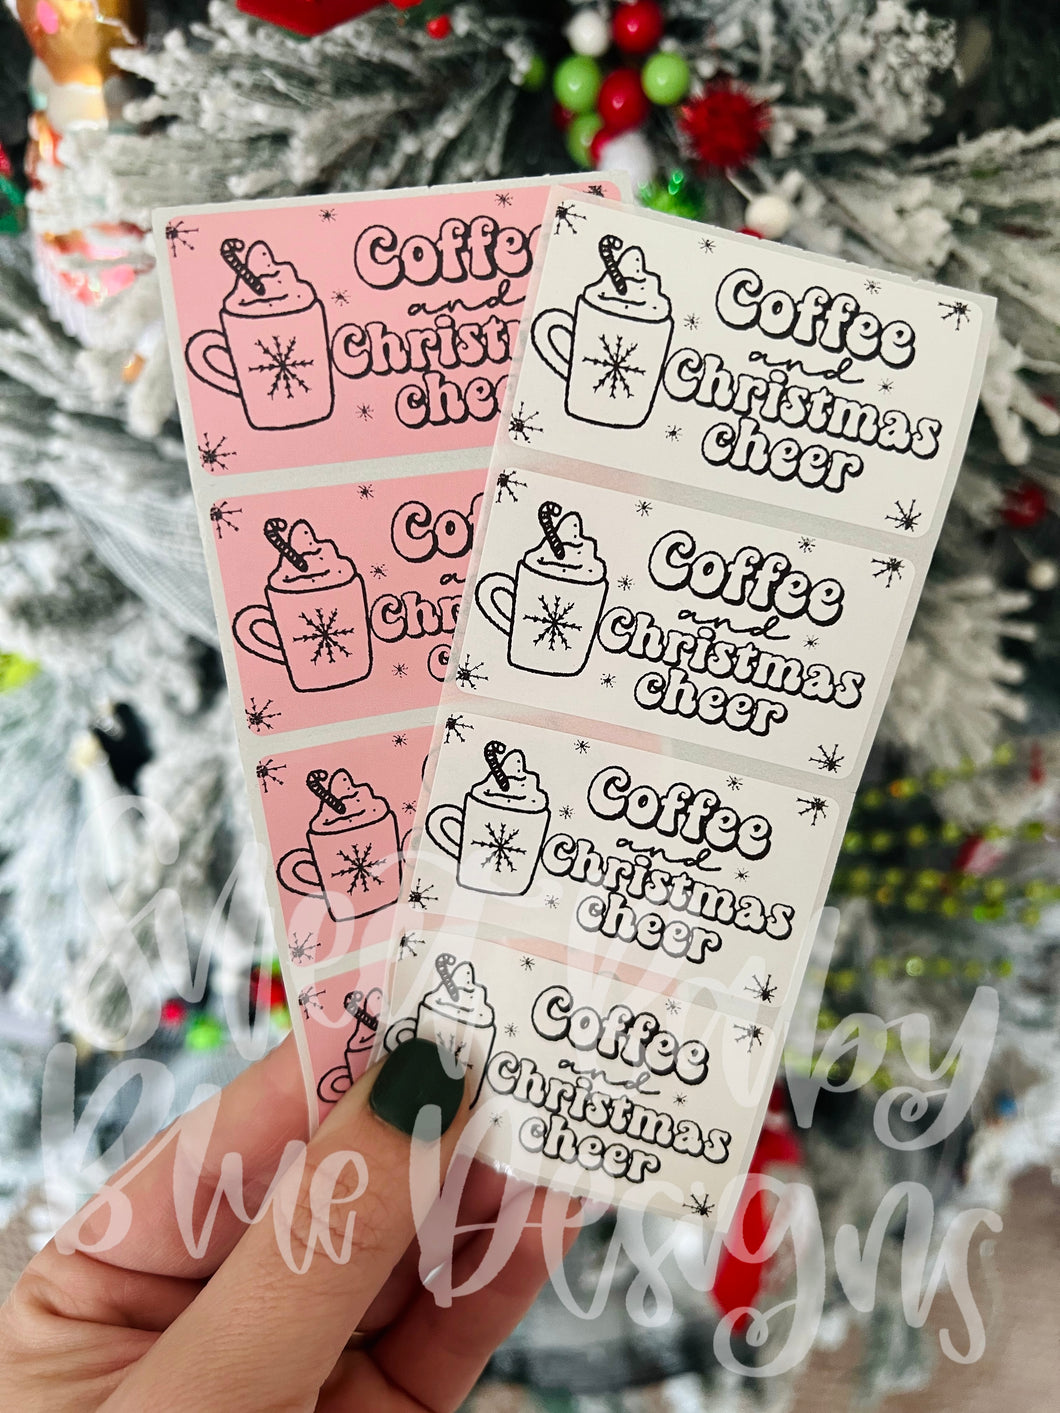 Coffee and Christmas cheer - Thermal printed sticker